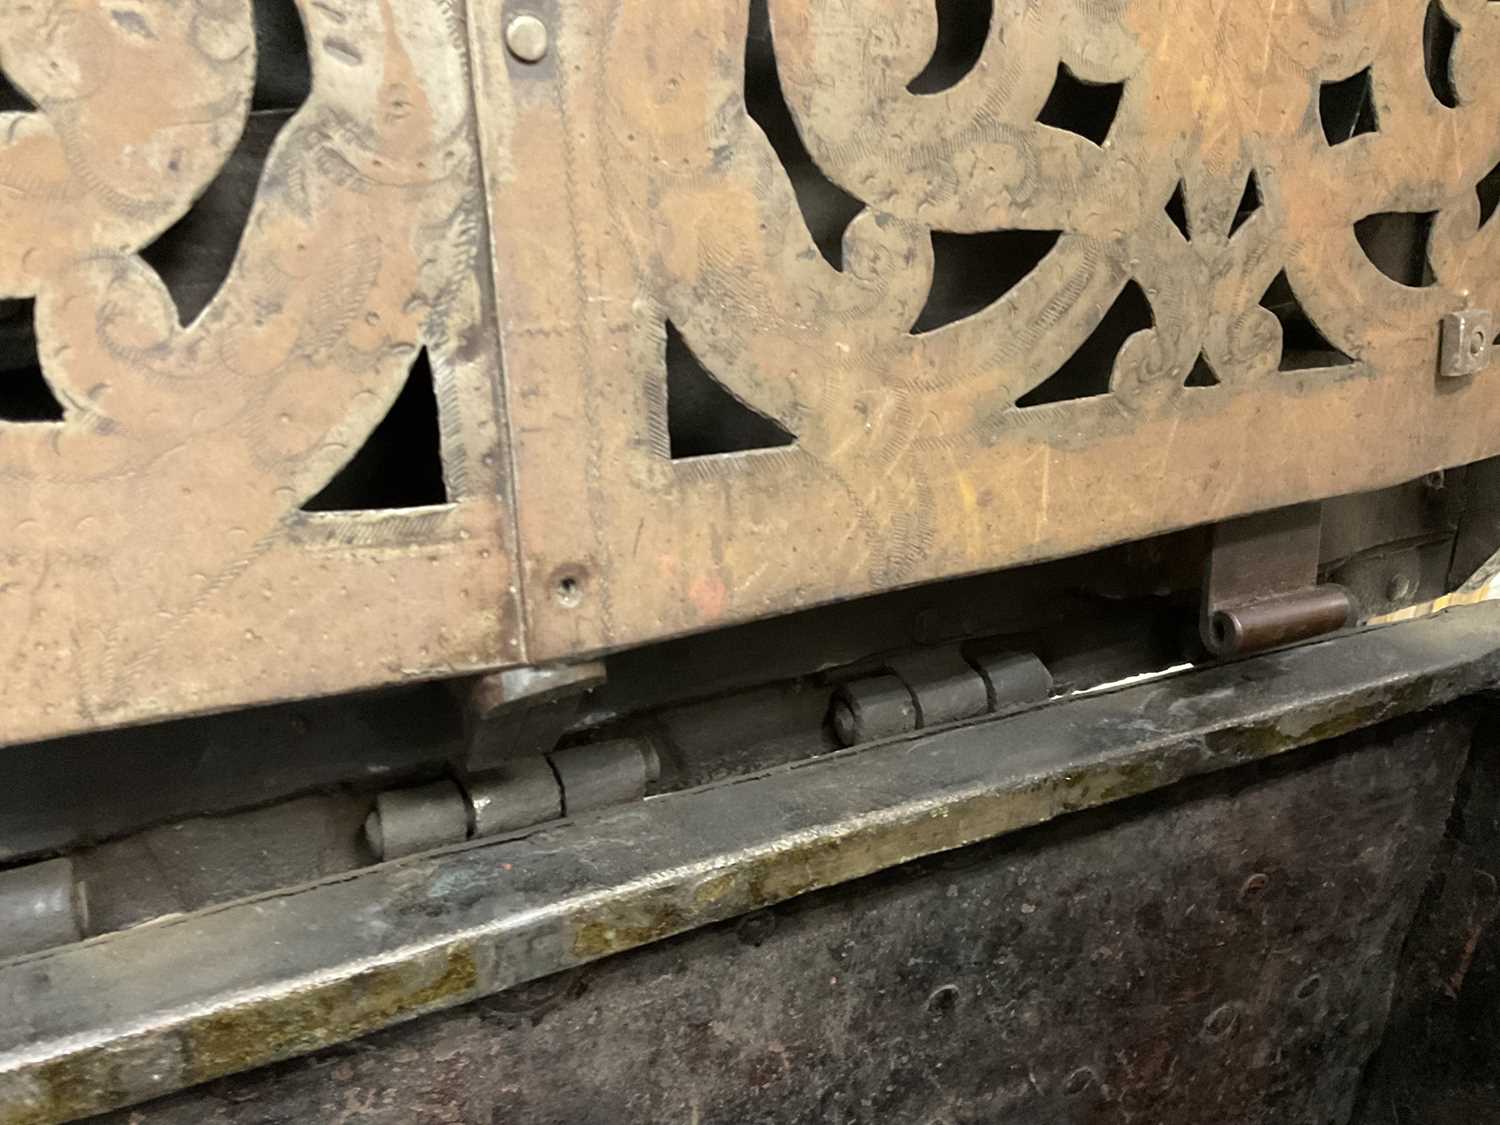 17th century German iron Armada chest with intricate locking system, key marked S. Morden - Image 18 of 23